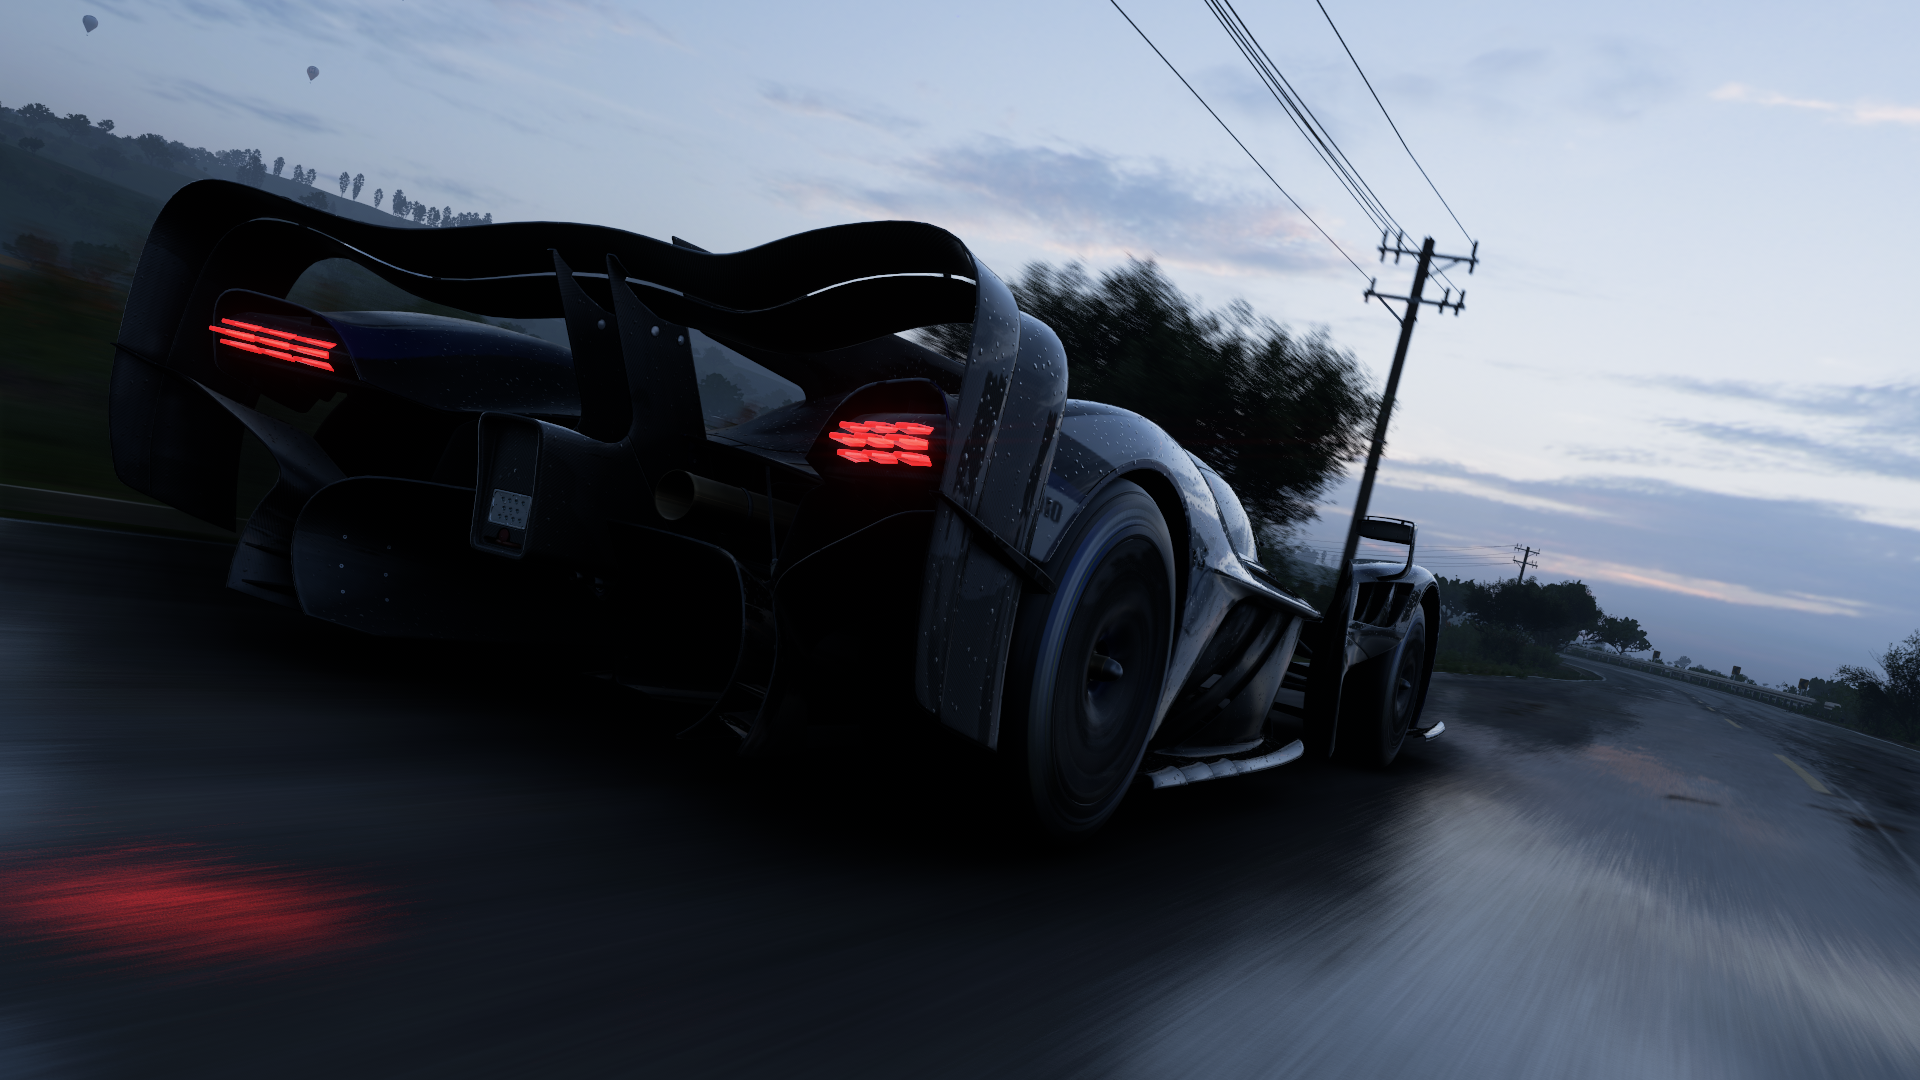 General 1920x1080 Forza Horizon 5 car screen shot Aston Martin aston martin valkyrie Hypercar British cars PlaygroundGames sky video game art clouds video games rear view taillights motion blur blurred power lines road CGI vehicle